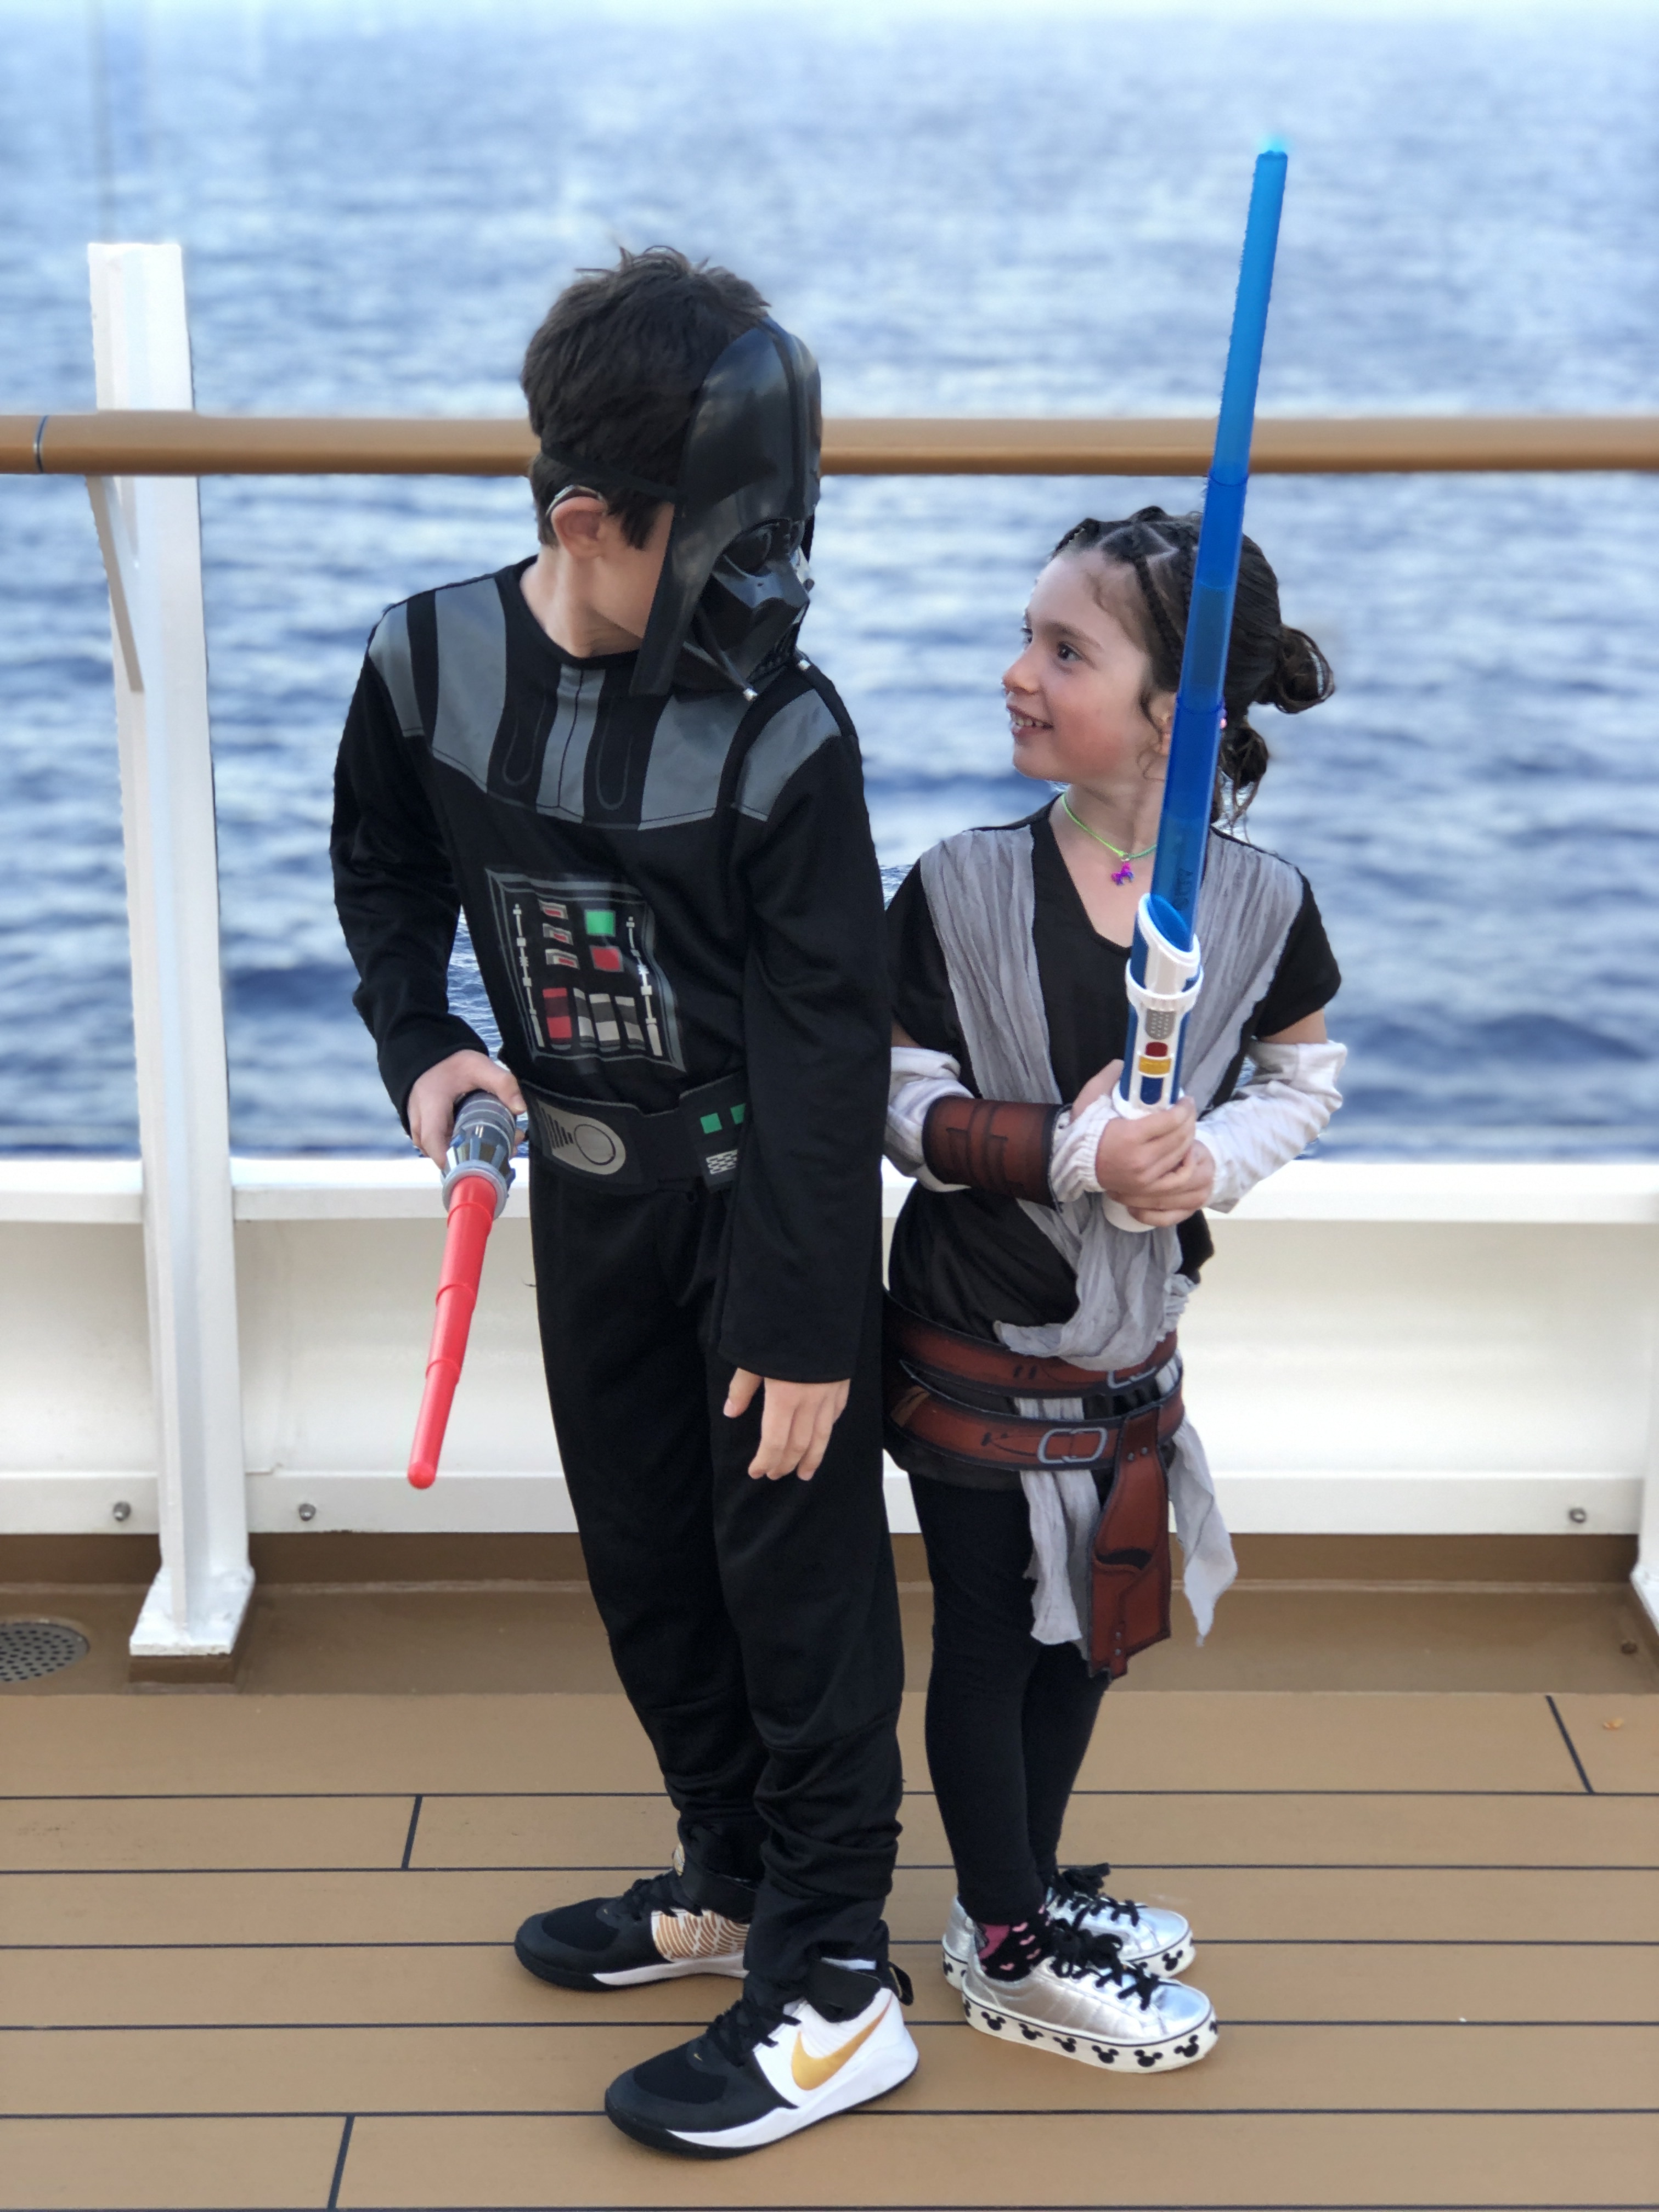 Star Wars Costumes for a Disney Cruise